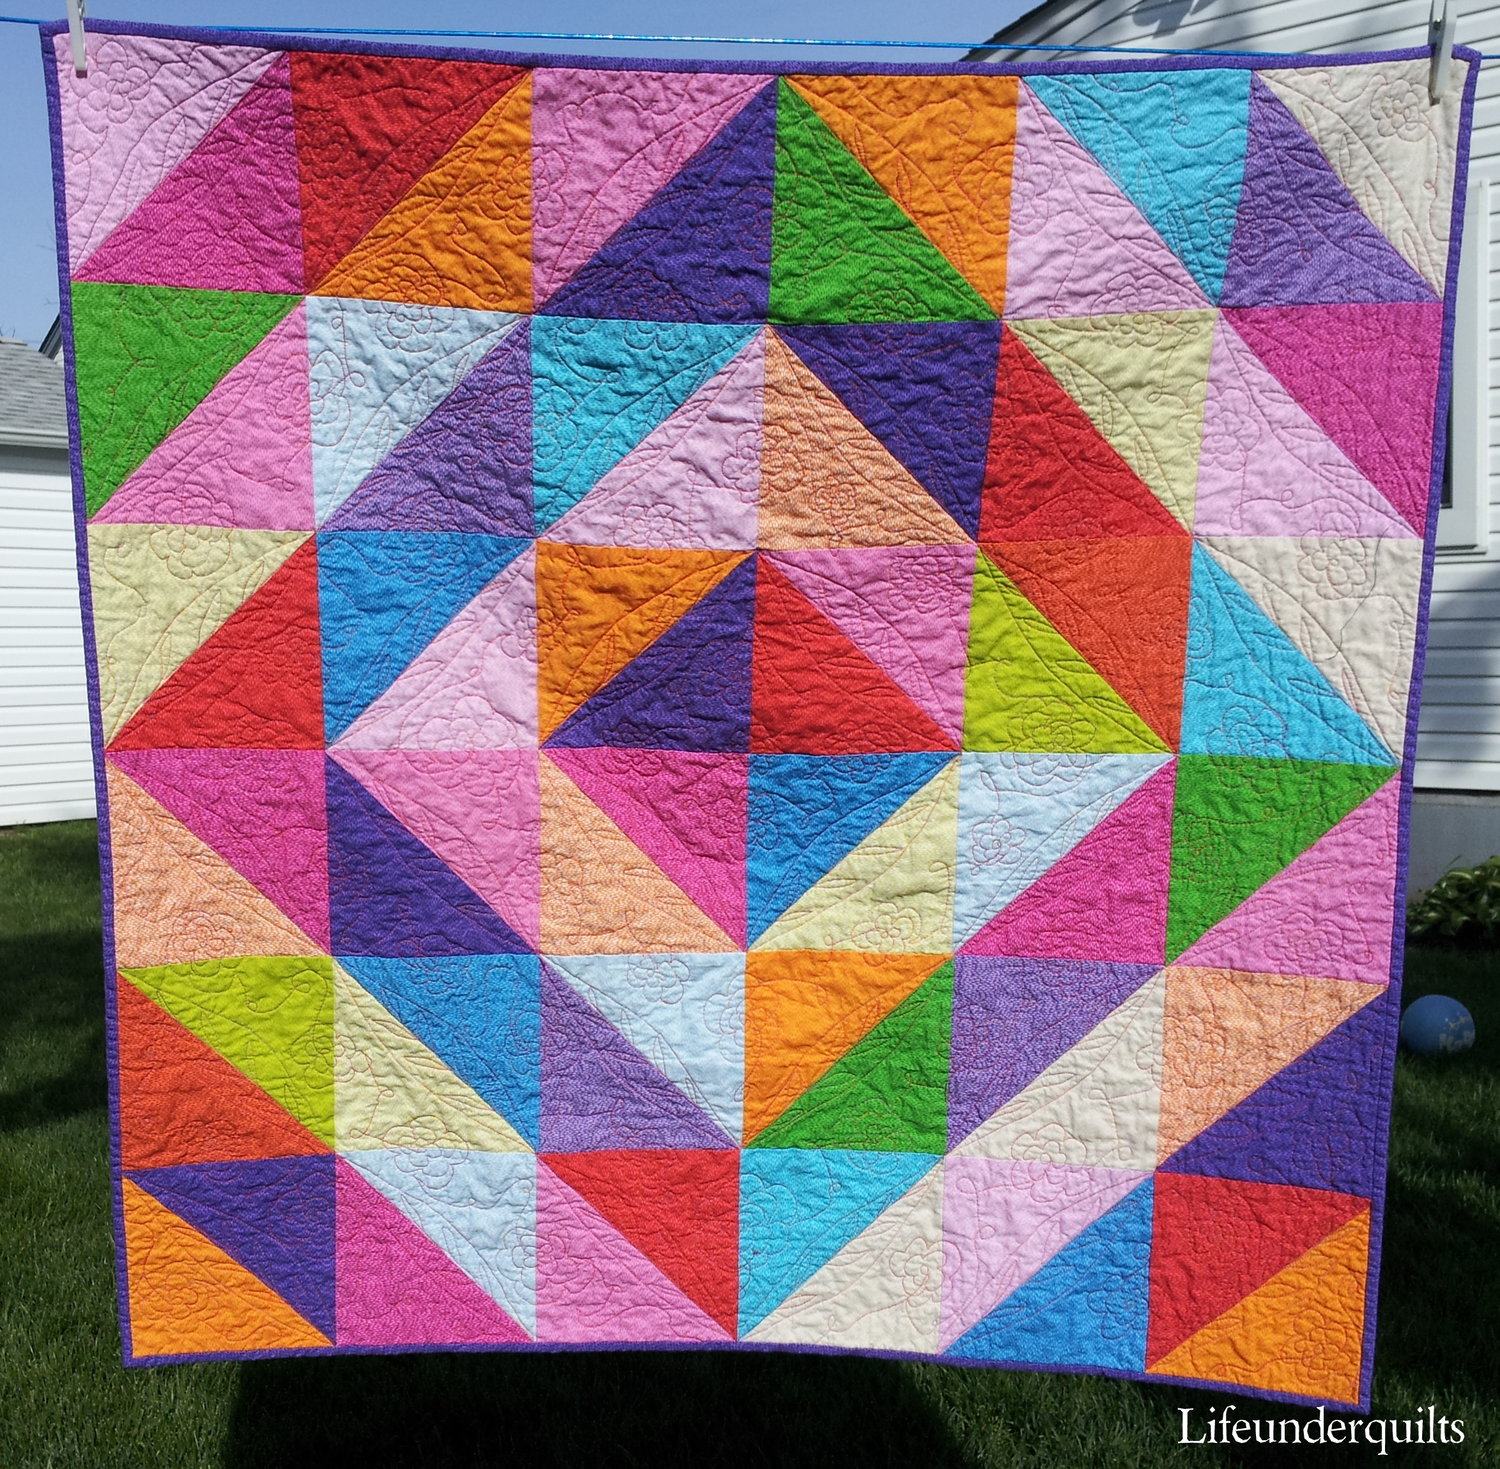 Many of her quilts, pillows and other hand-sewn items are      available for sale.